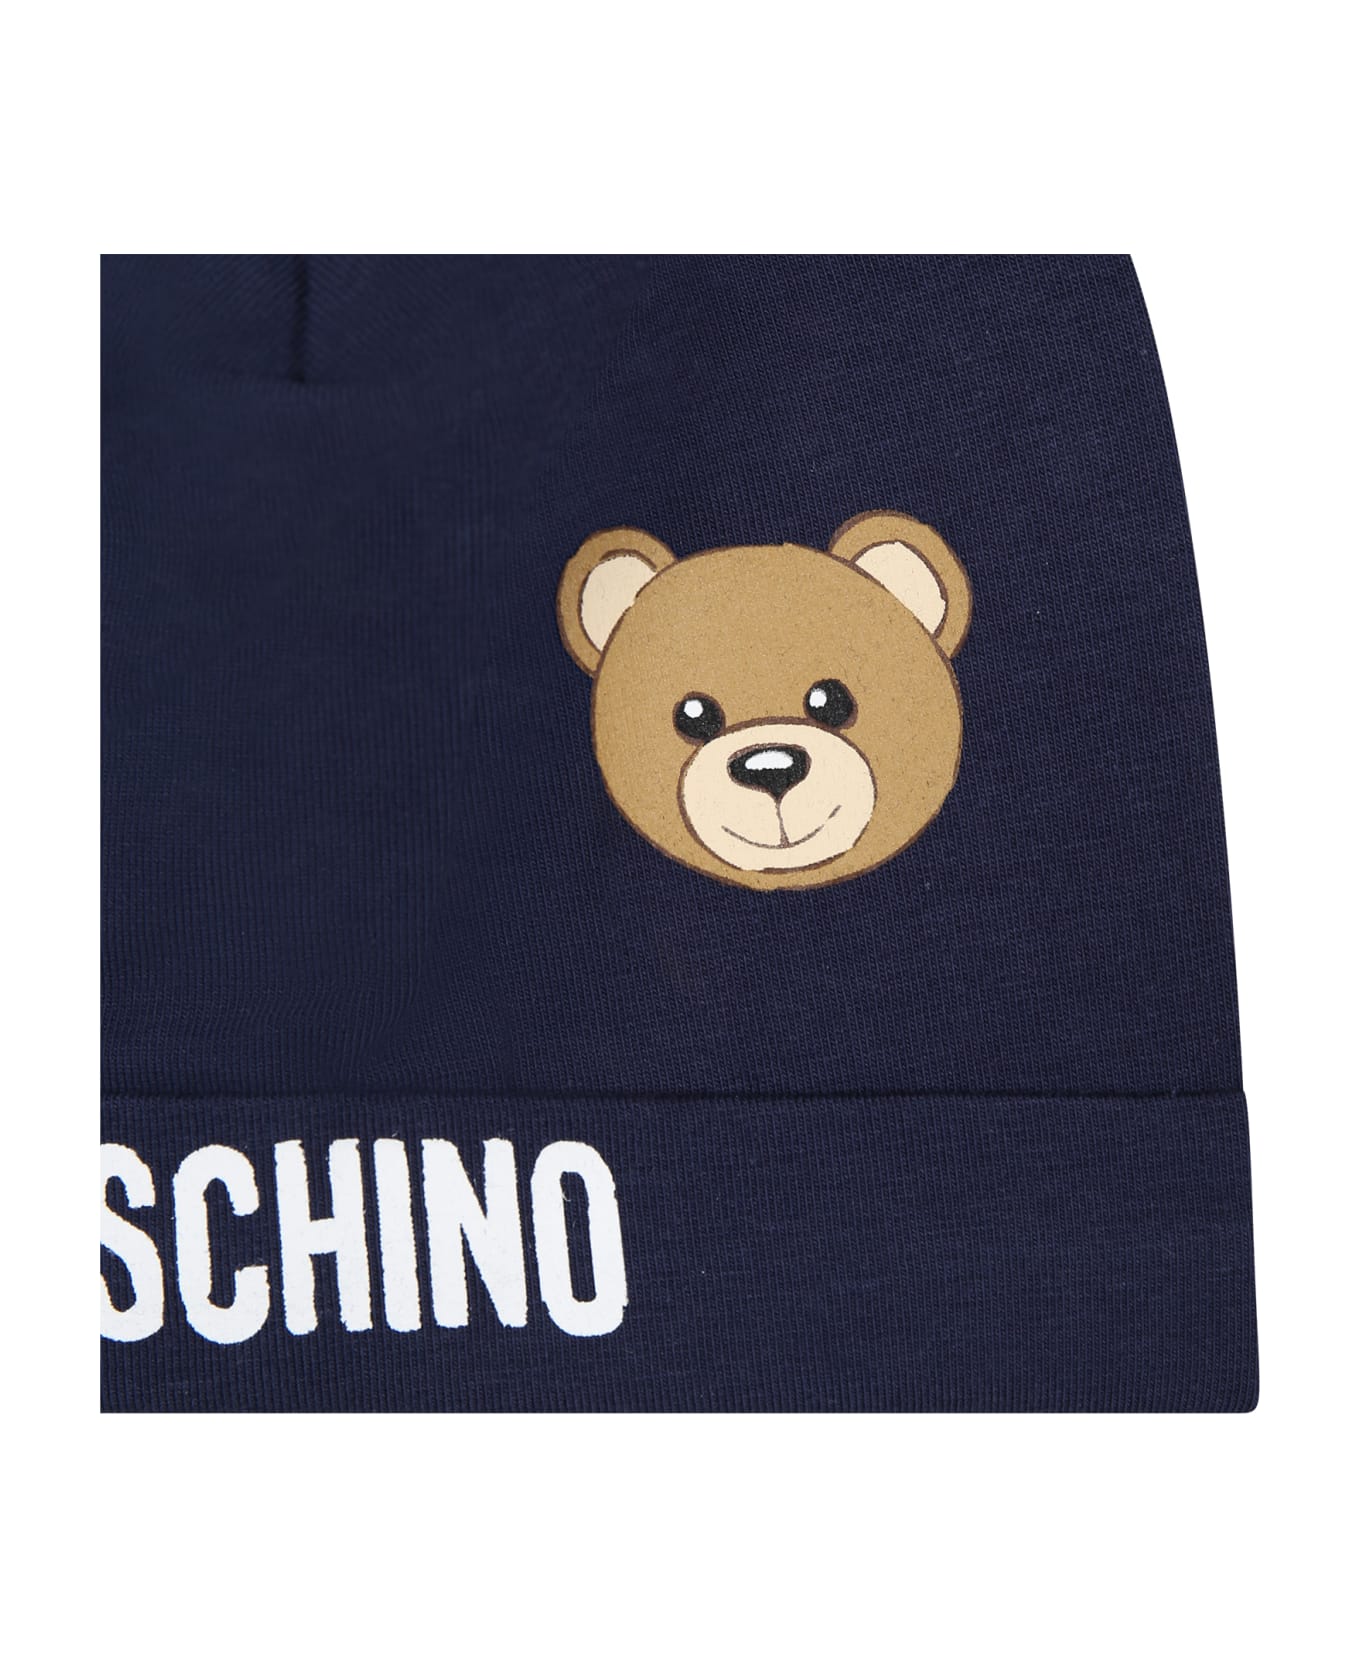 Moschino Blue Babies Hat With Logo And Teddy Bear - Blue